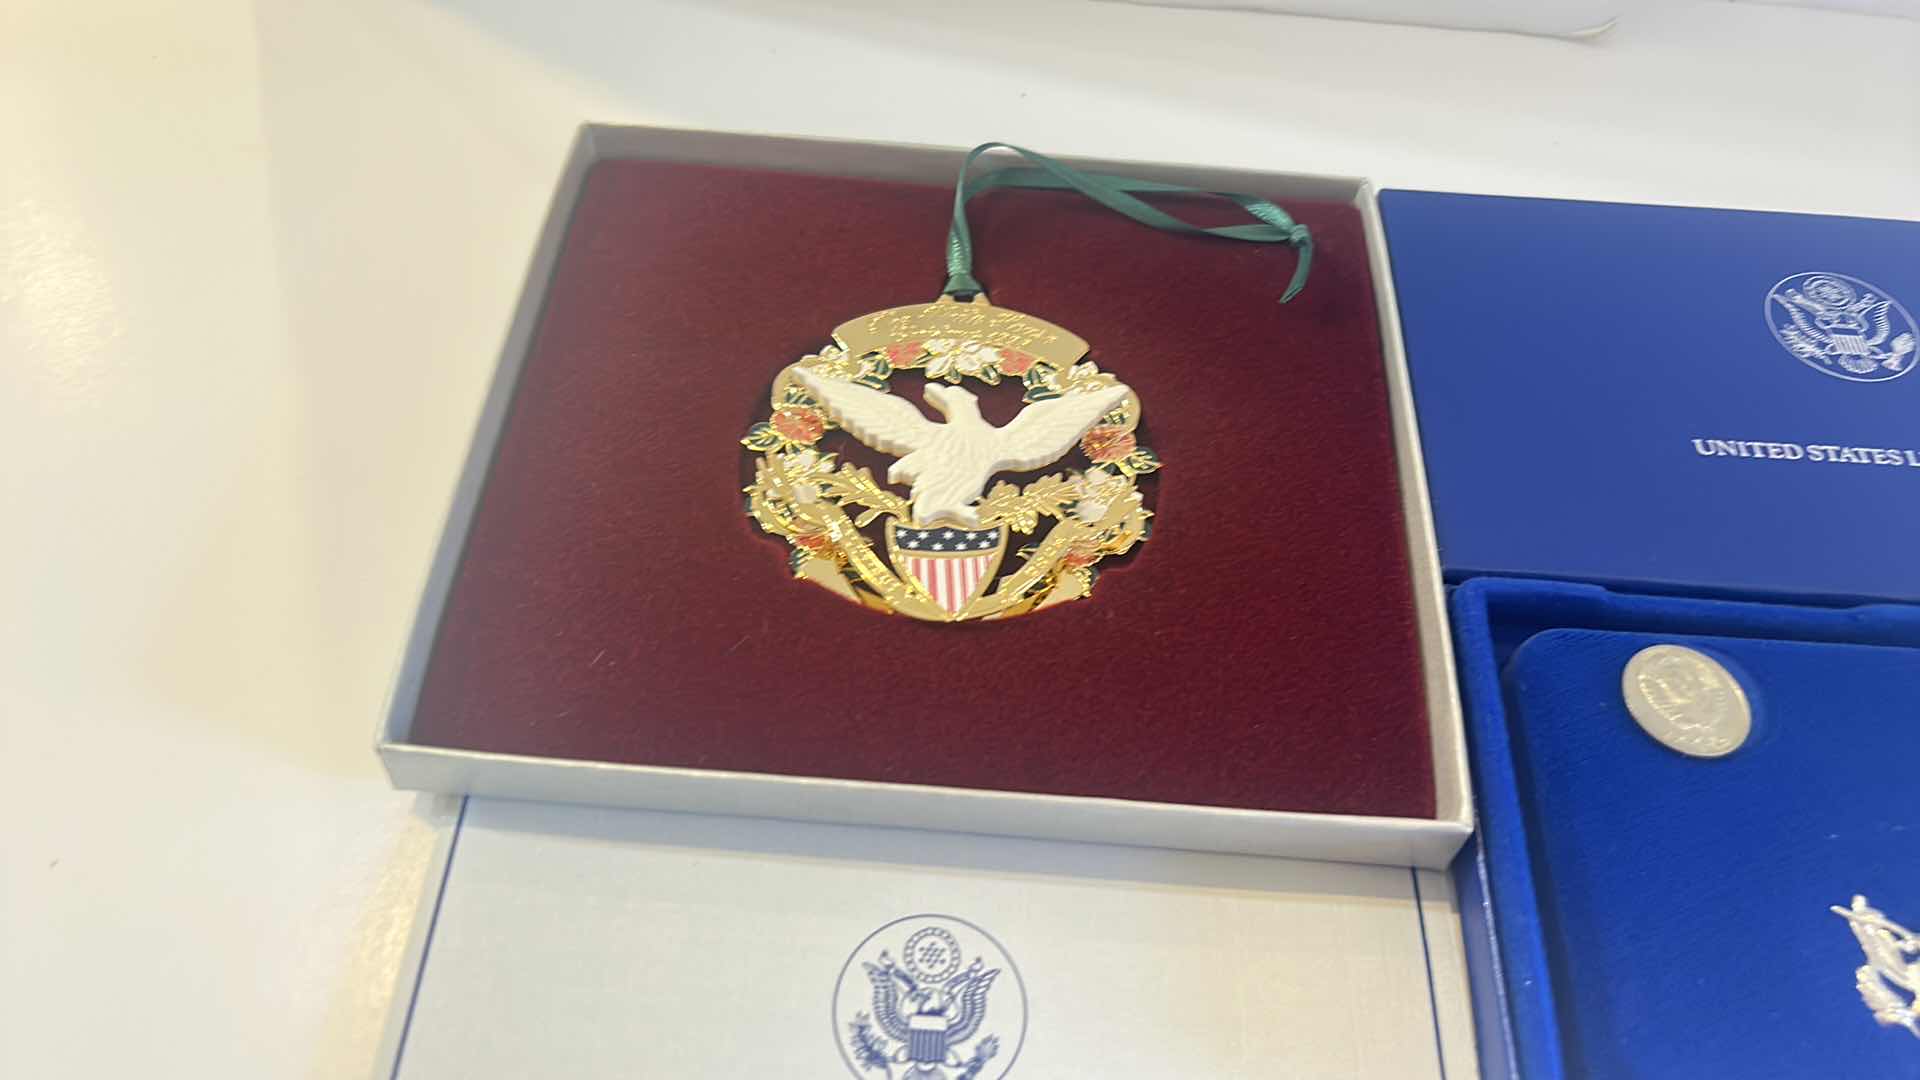 Photo 3 of UNITED STATES MINT LIBERTY COINS AND CHRISTMAS ORNAMENT